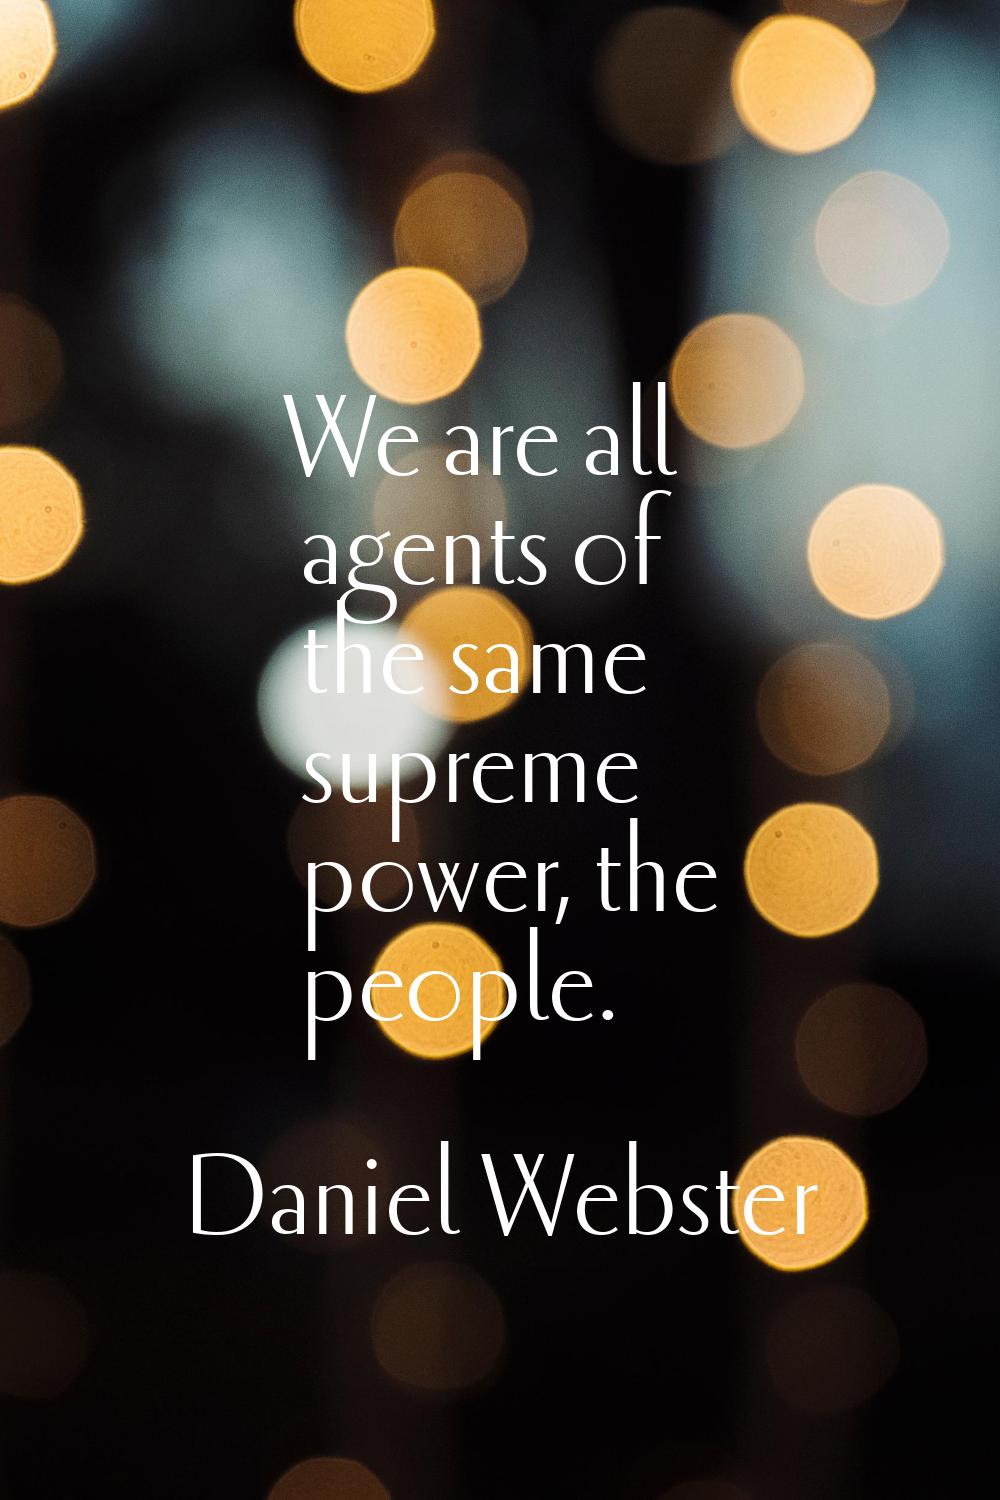 We are all agents of the same supreme power, the people.